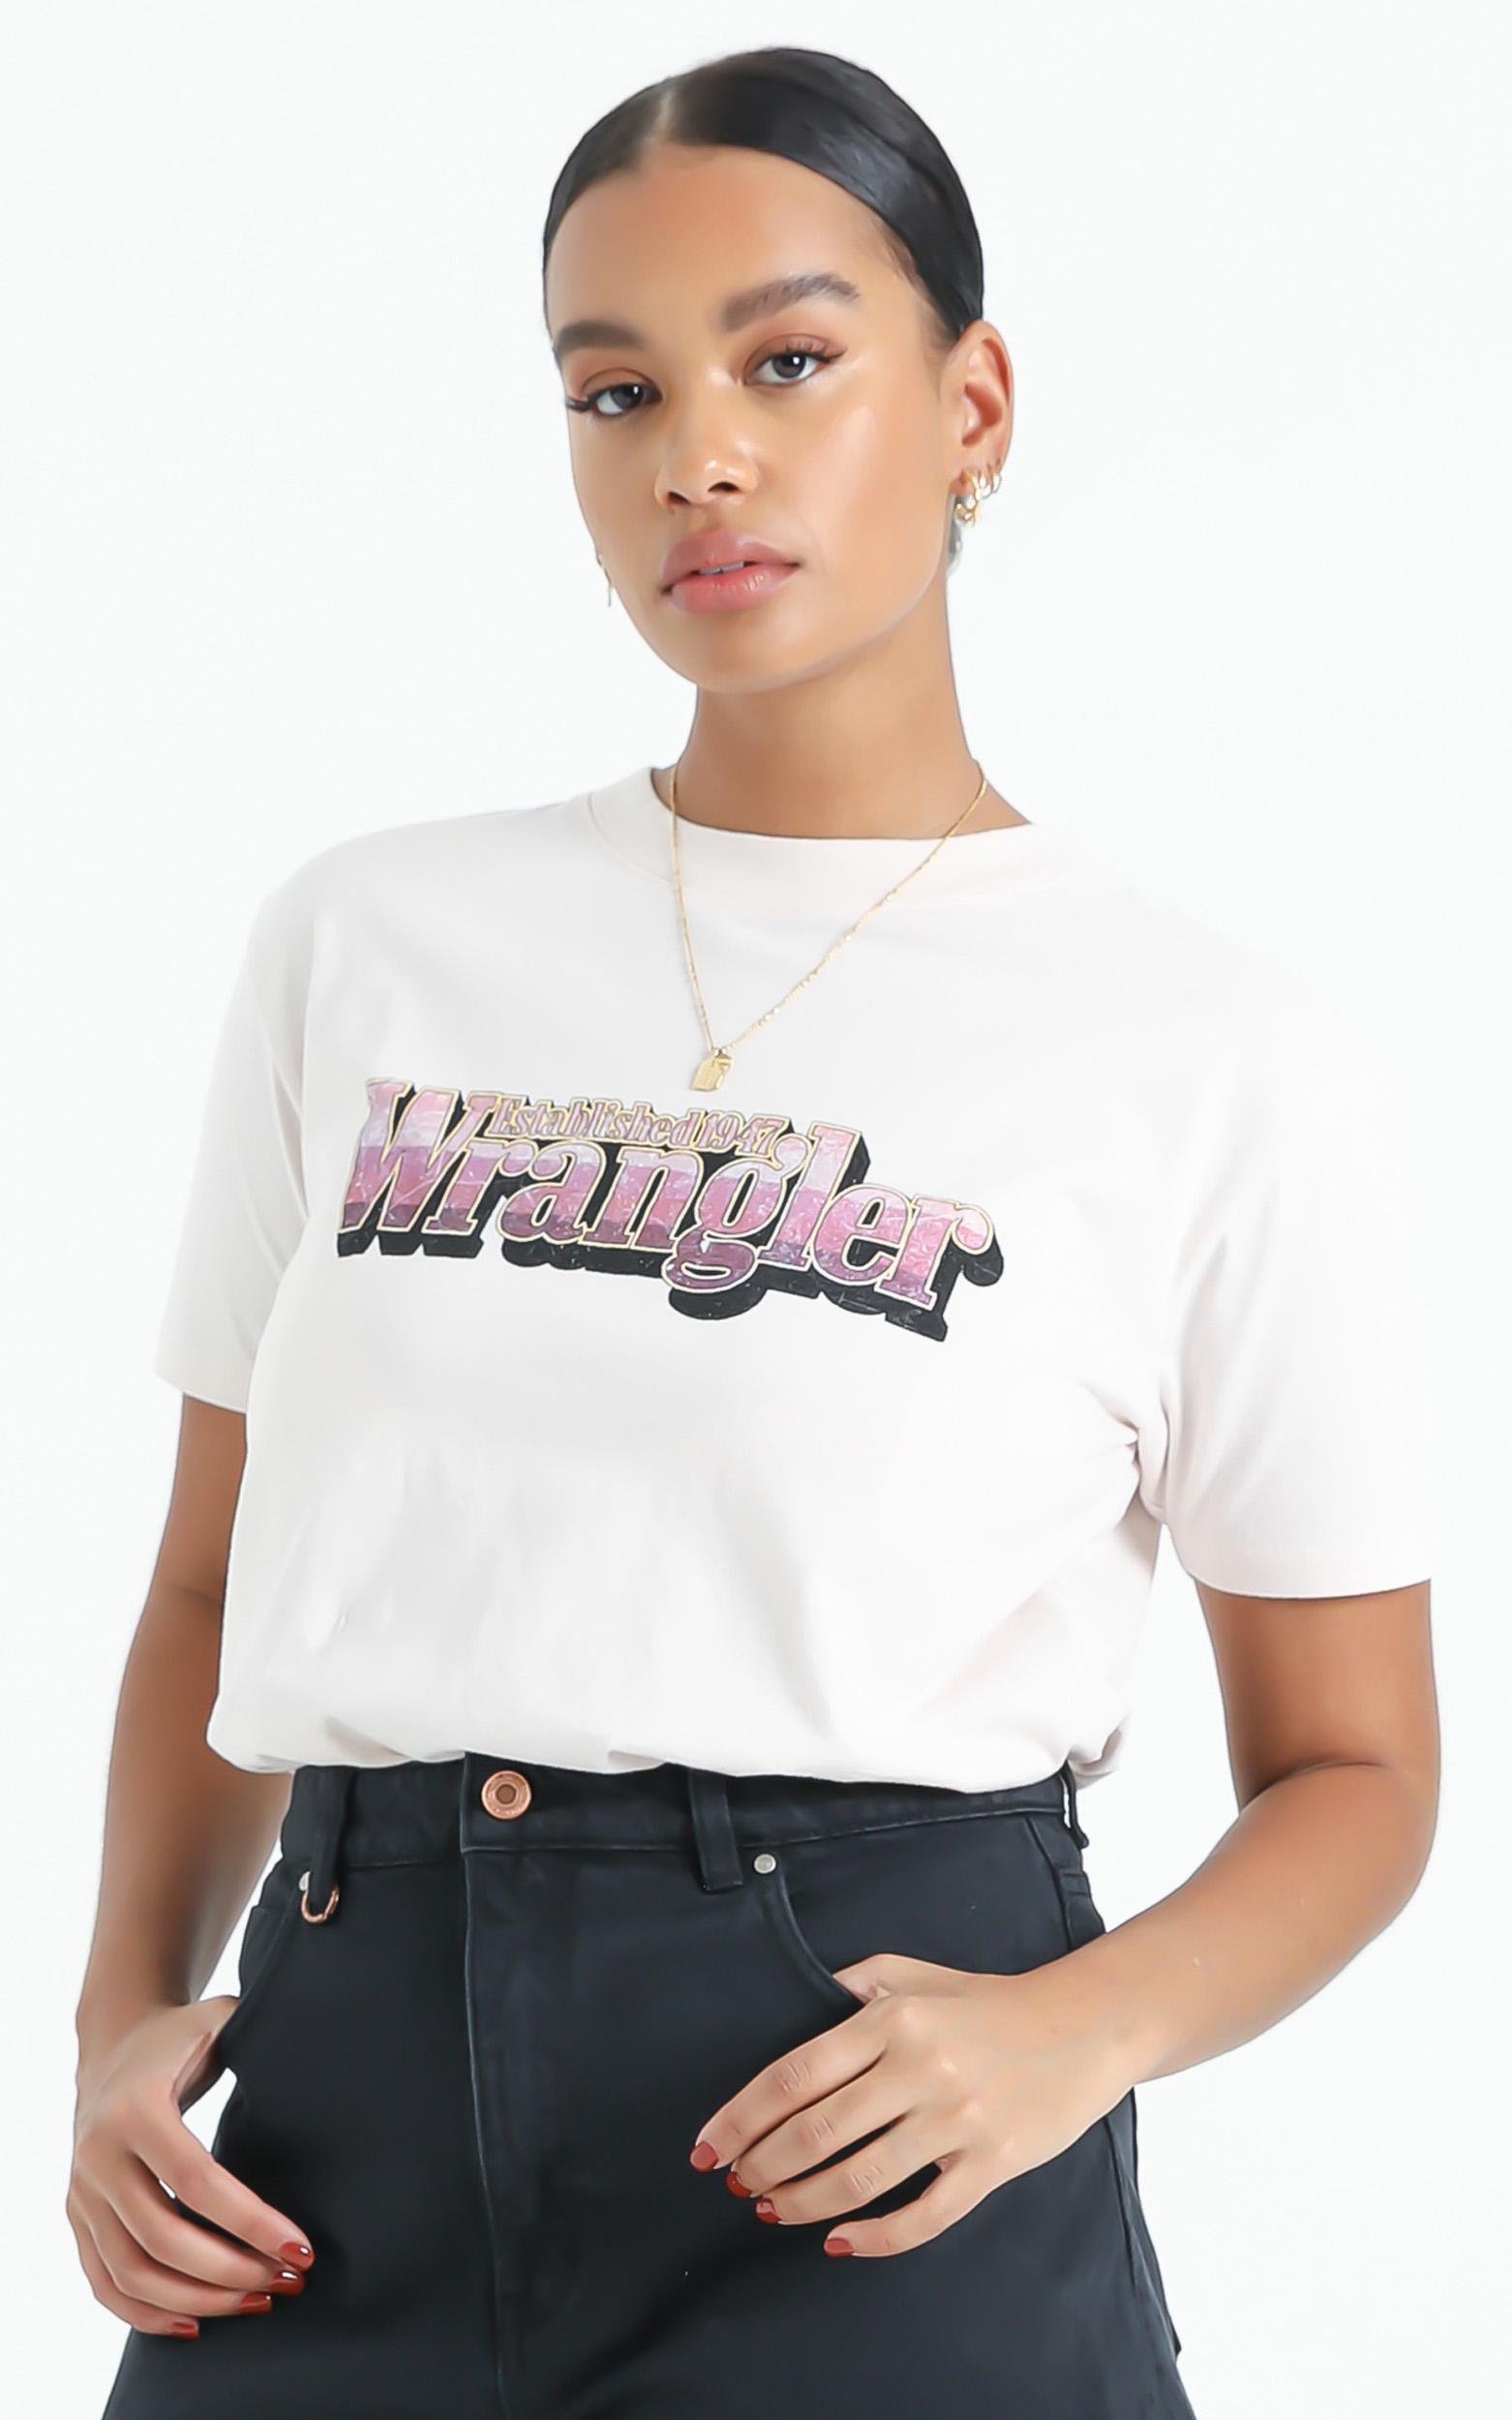 Wrangler - Hyland Tee in Faded Pink - 6 (XS), Pink, hi-res image number null